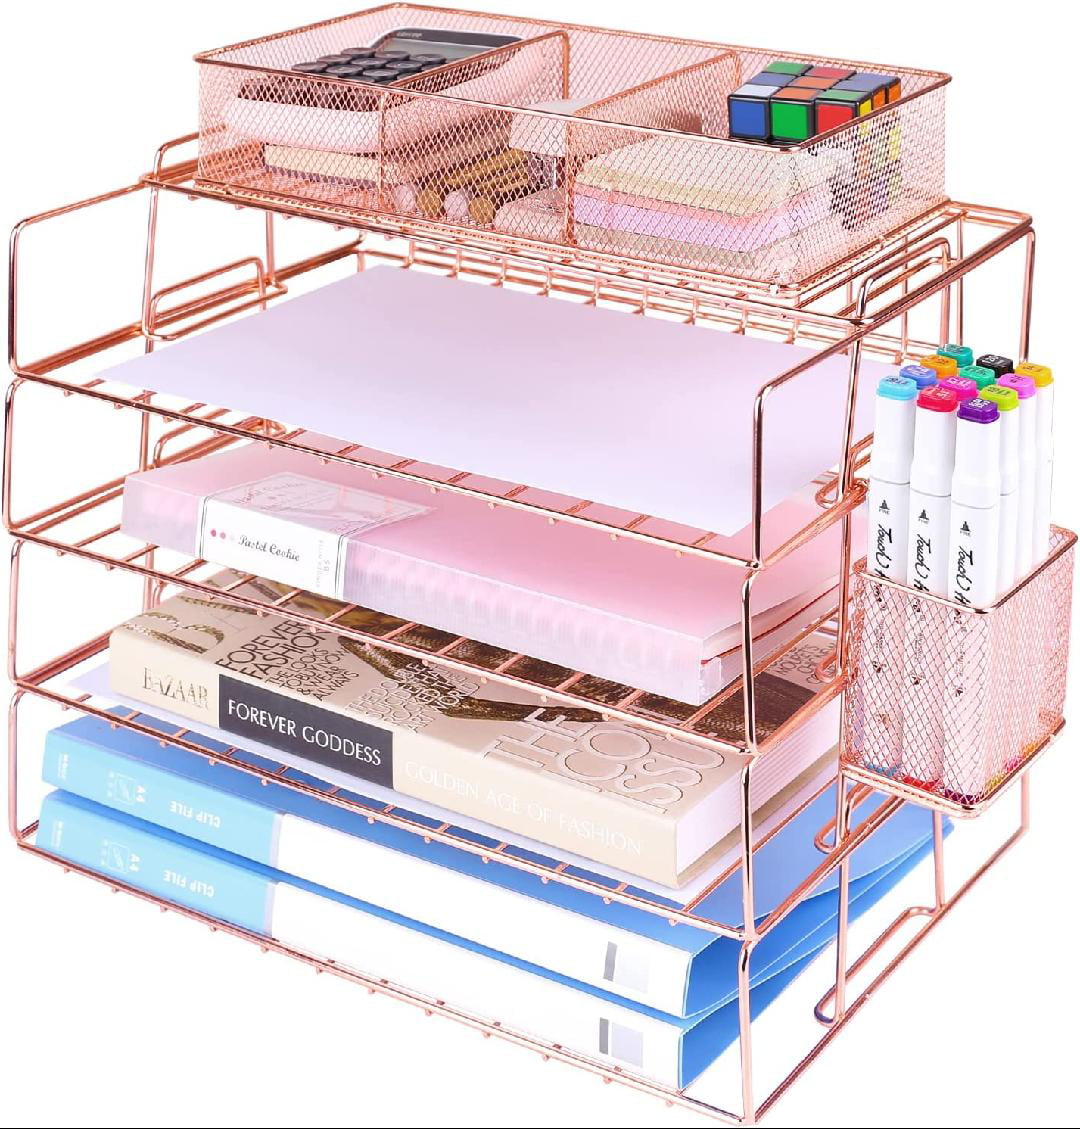 Home & Office Workspace Decorative Stacking Rack Supplies Holder Kertnic 4-Tier Stackable Paper Tray Desk Organizer Rose Gold Rose Gold Metal Letter Trays for File Documents 